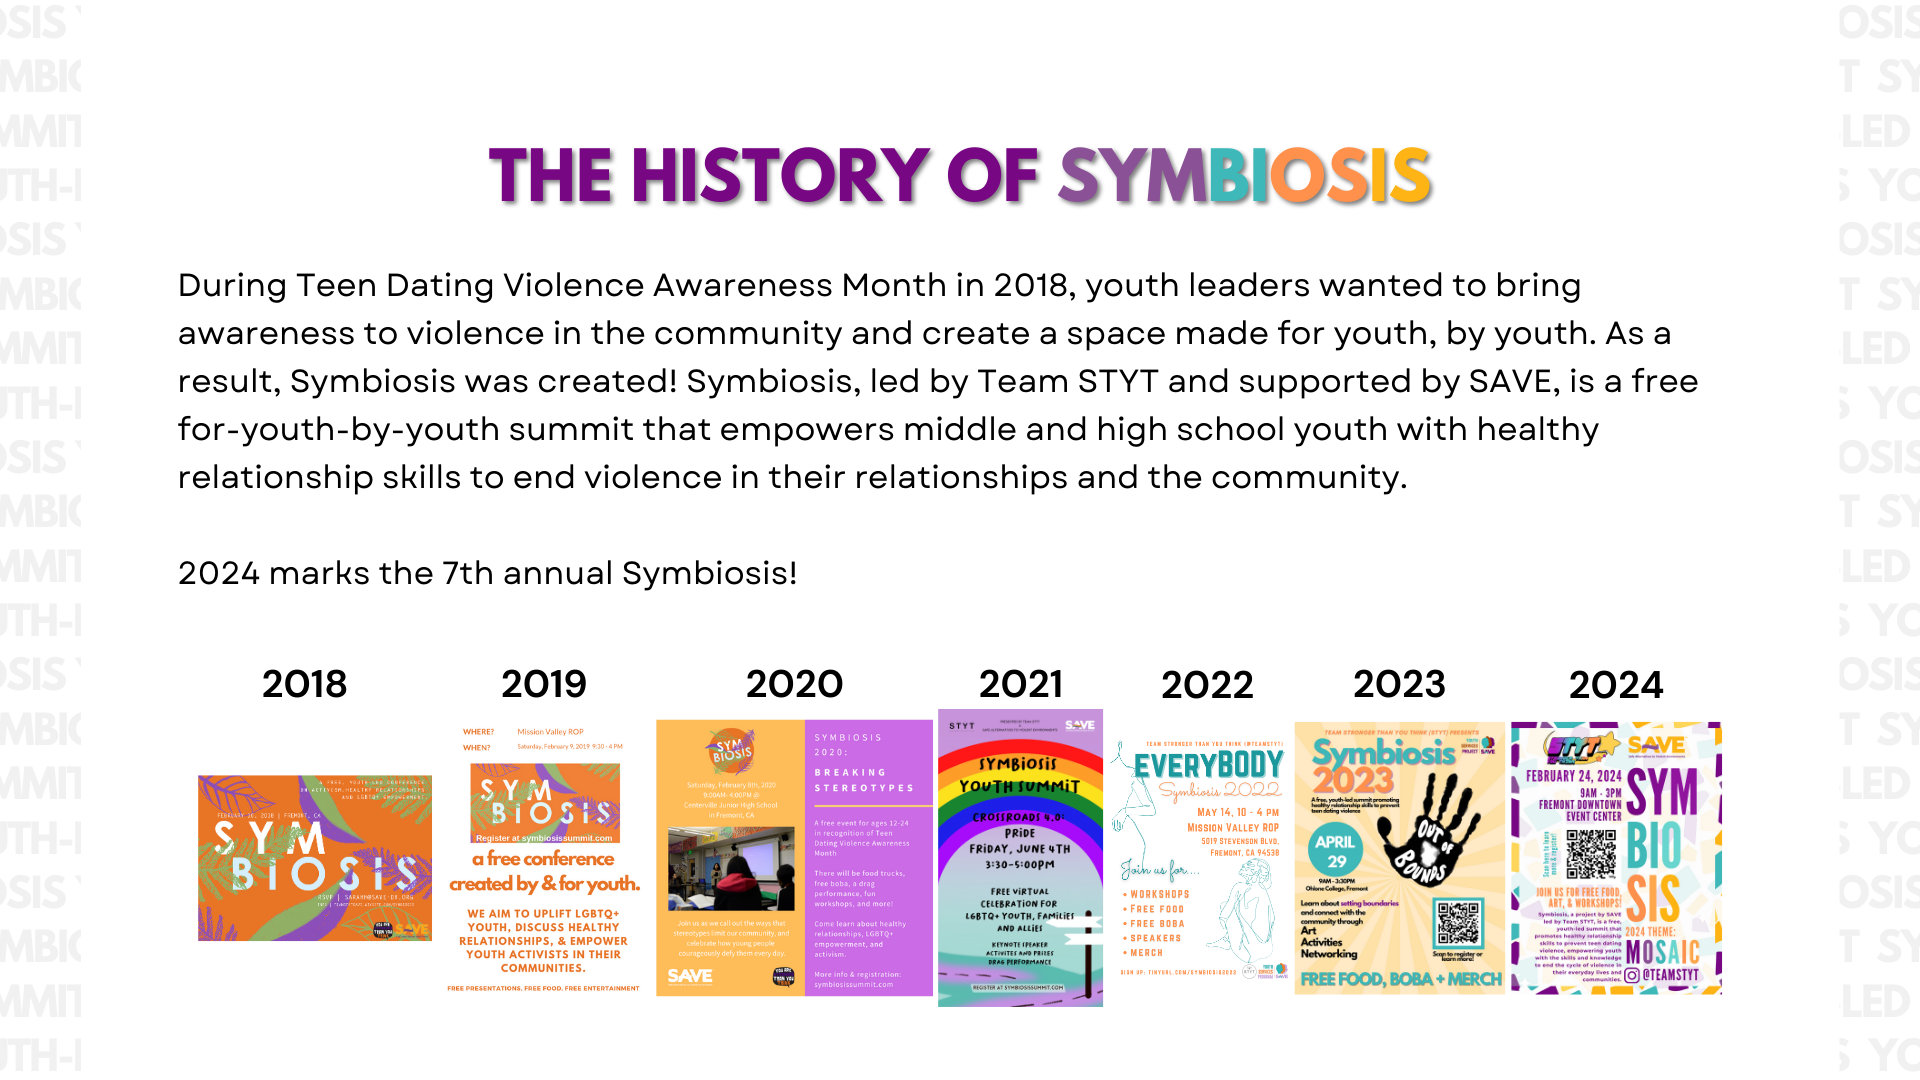 During Teen Dating Violence Awareness Month in 2018, youth leaders wanted to bring awareness to violence in the community and create a space made for youth, by youth. As a result, Symbiosis was created! Symbiosis, led by Team STYT and supported by SAVE, is a free for-youth-by-youth summit that empowers middle and high school youth with healthy relationship skills to end violence in their relationships and the community. 2024 marks the 7th annual Symbiosis!